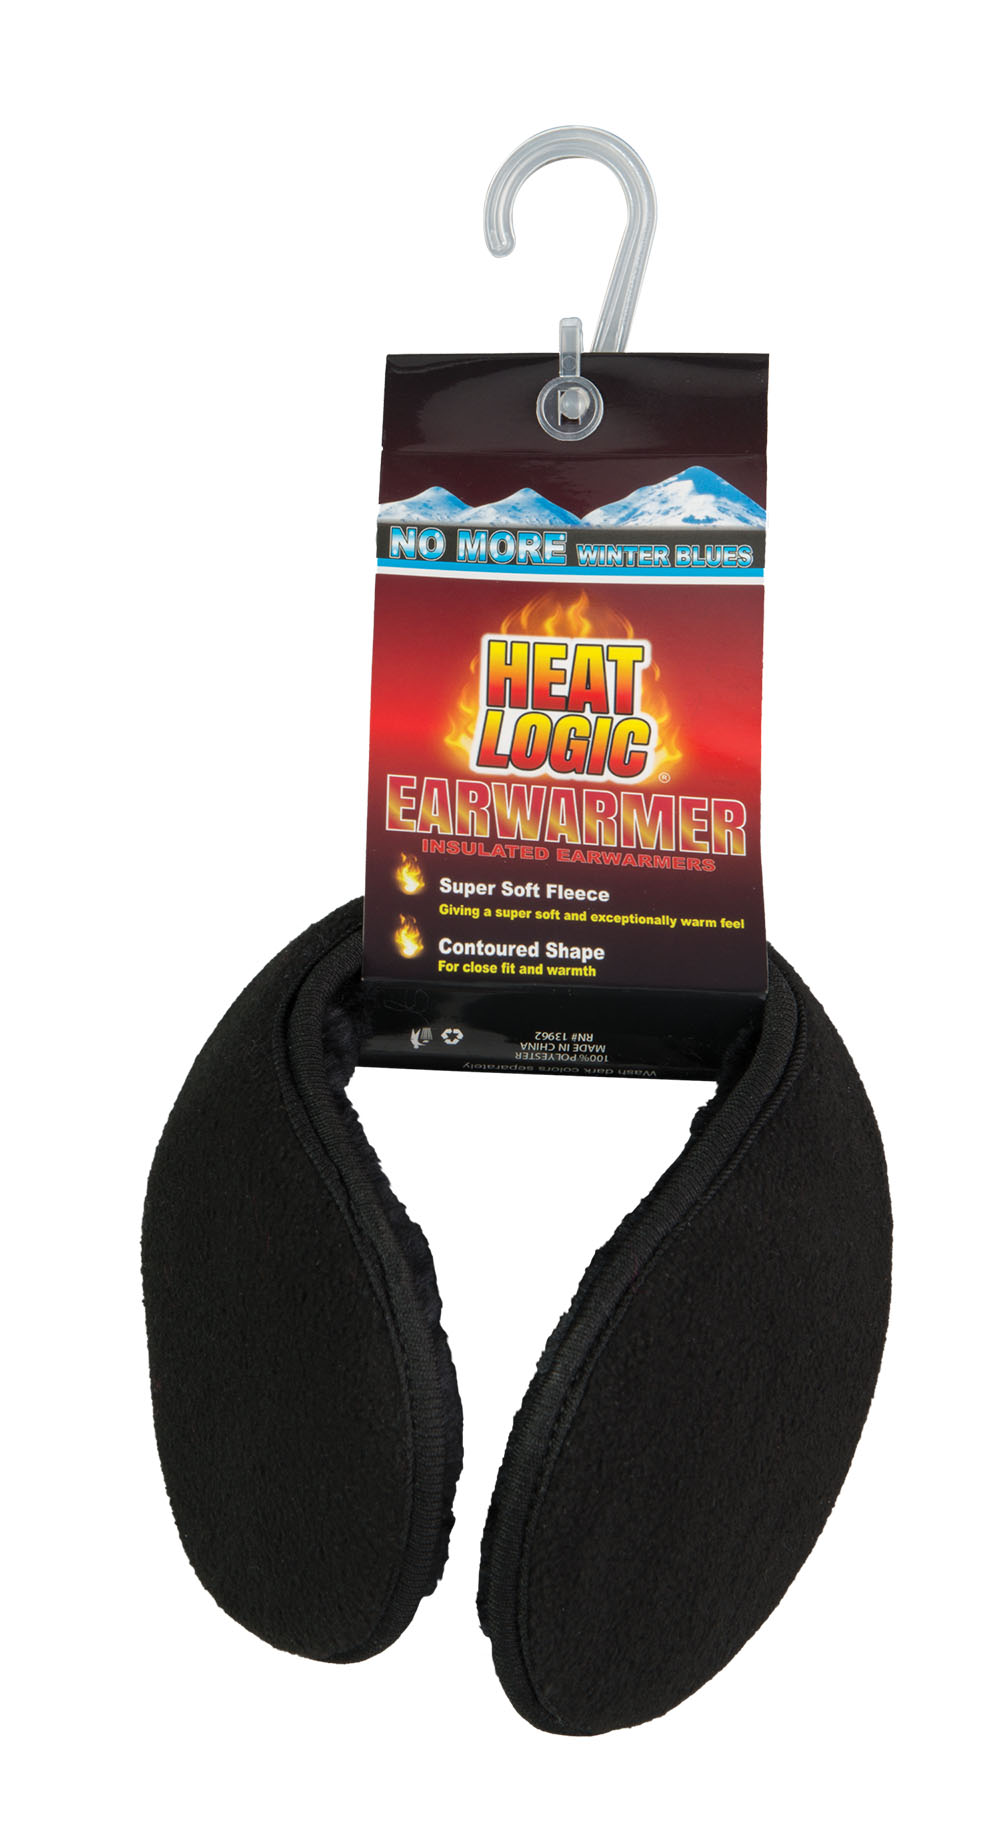 Insulated Ear Warmers - Behind the Neck Earmuff - Cold Weather Accessories